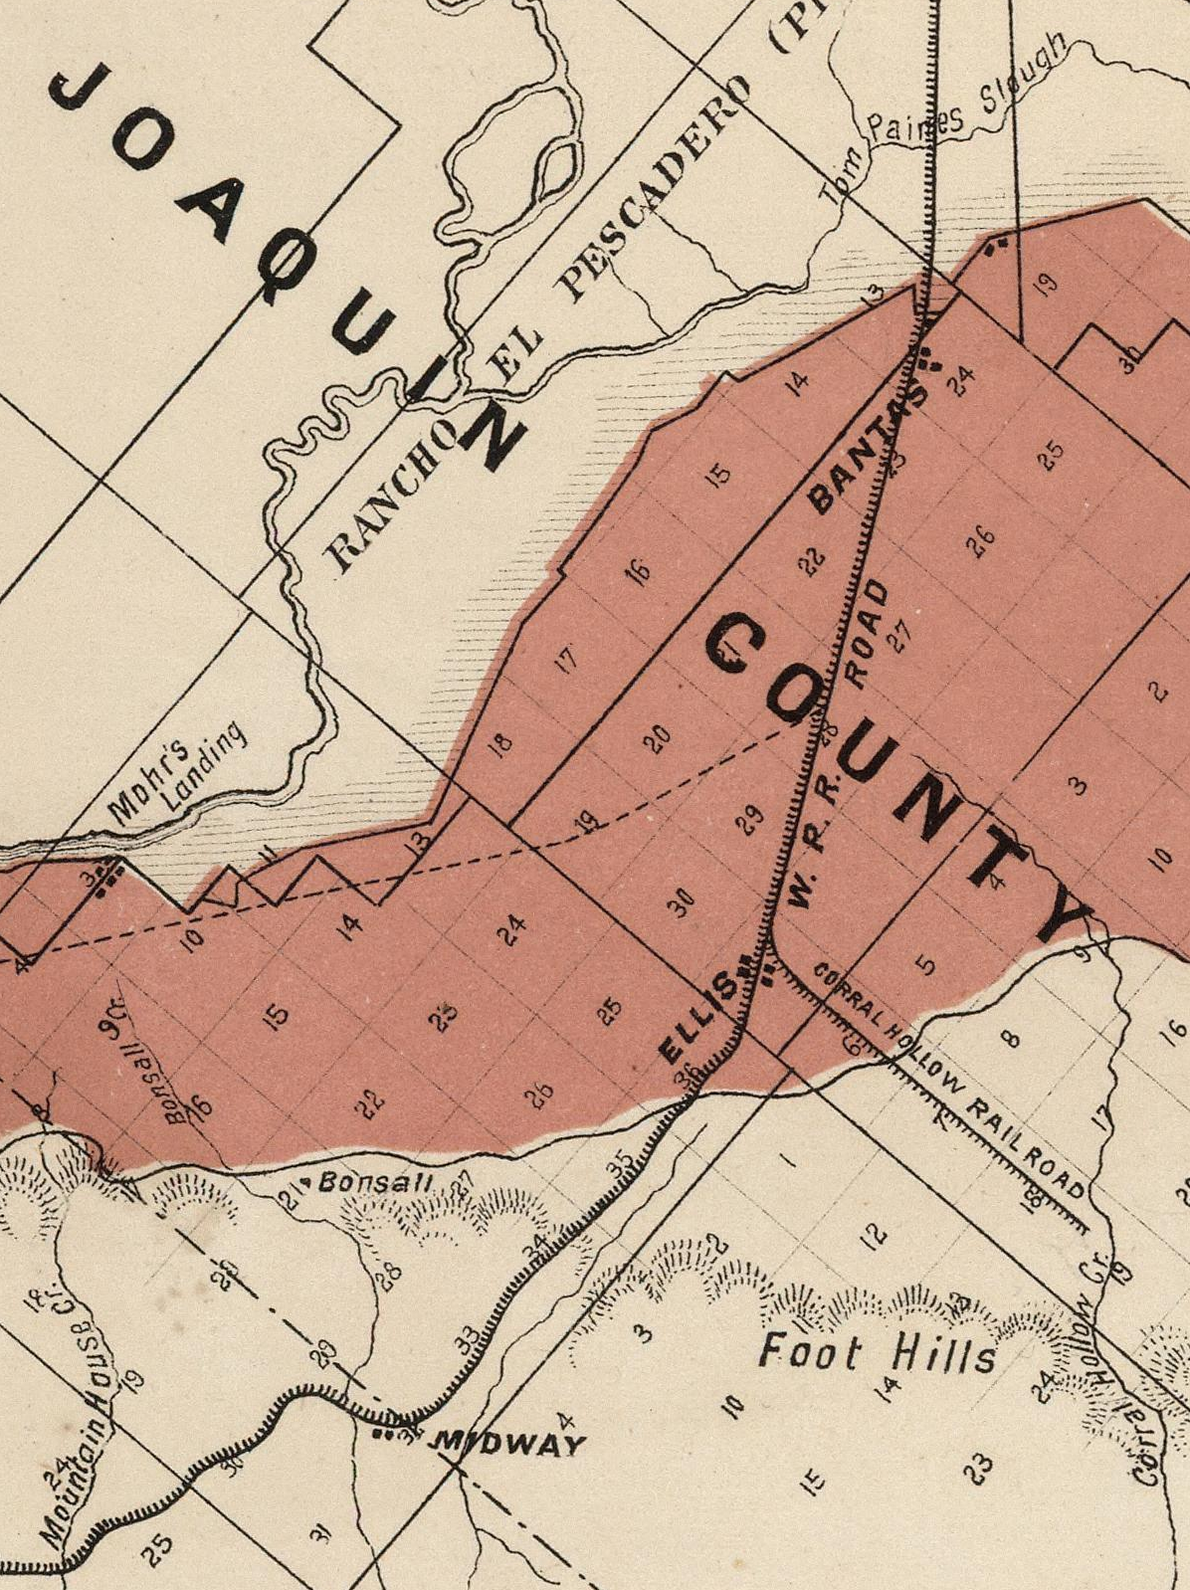 1877 West Side Irrigation Co. Map of Tulare Township (Image)